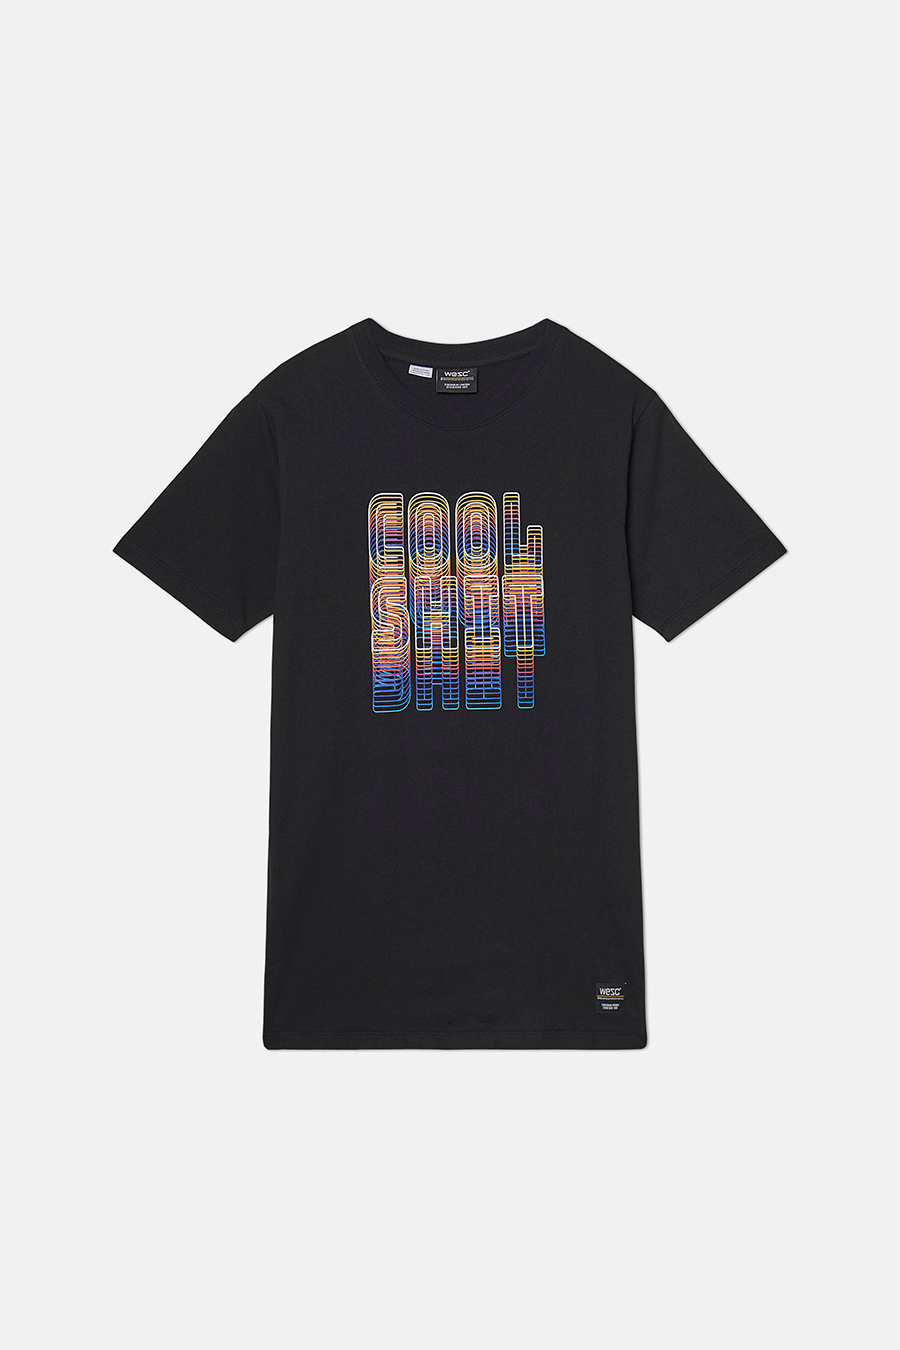 Max Cool Shit Tee | Black - Main Image Number 1 of 1